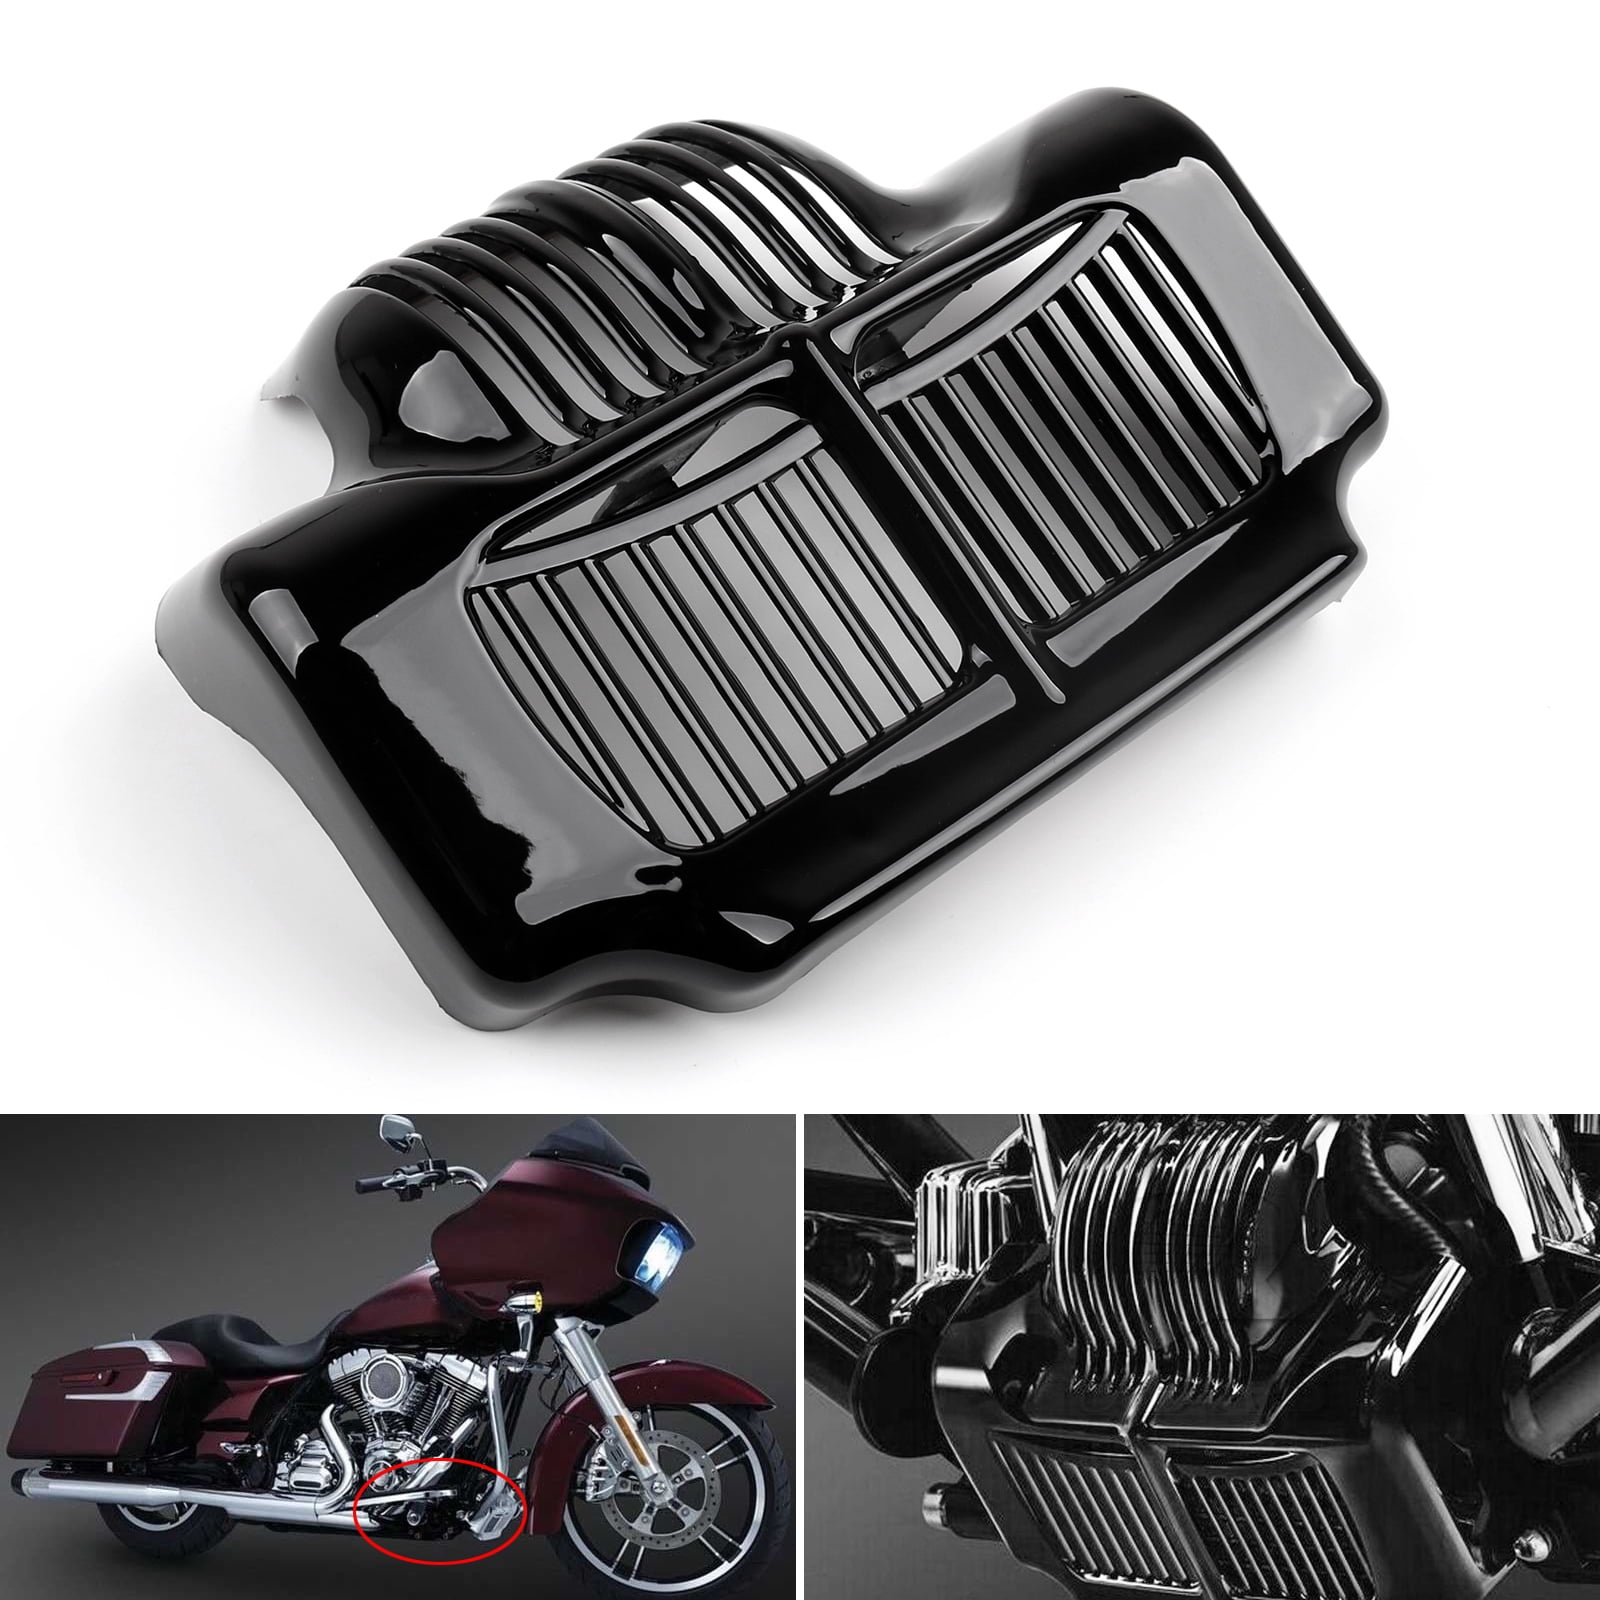 Areyourshop Stock Oil Cooler Cover For 11 15 Harley Touring Electra Road Street Glide Walmart Com